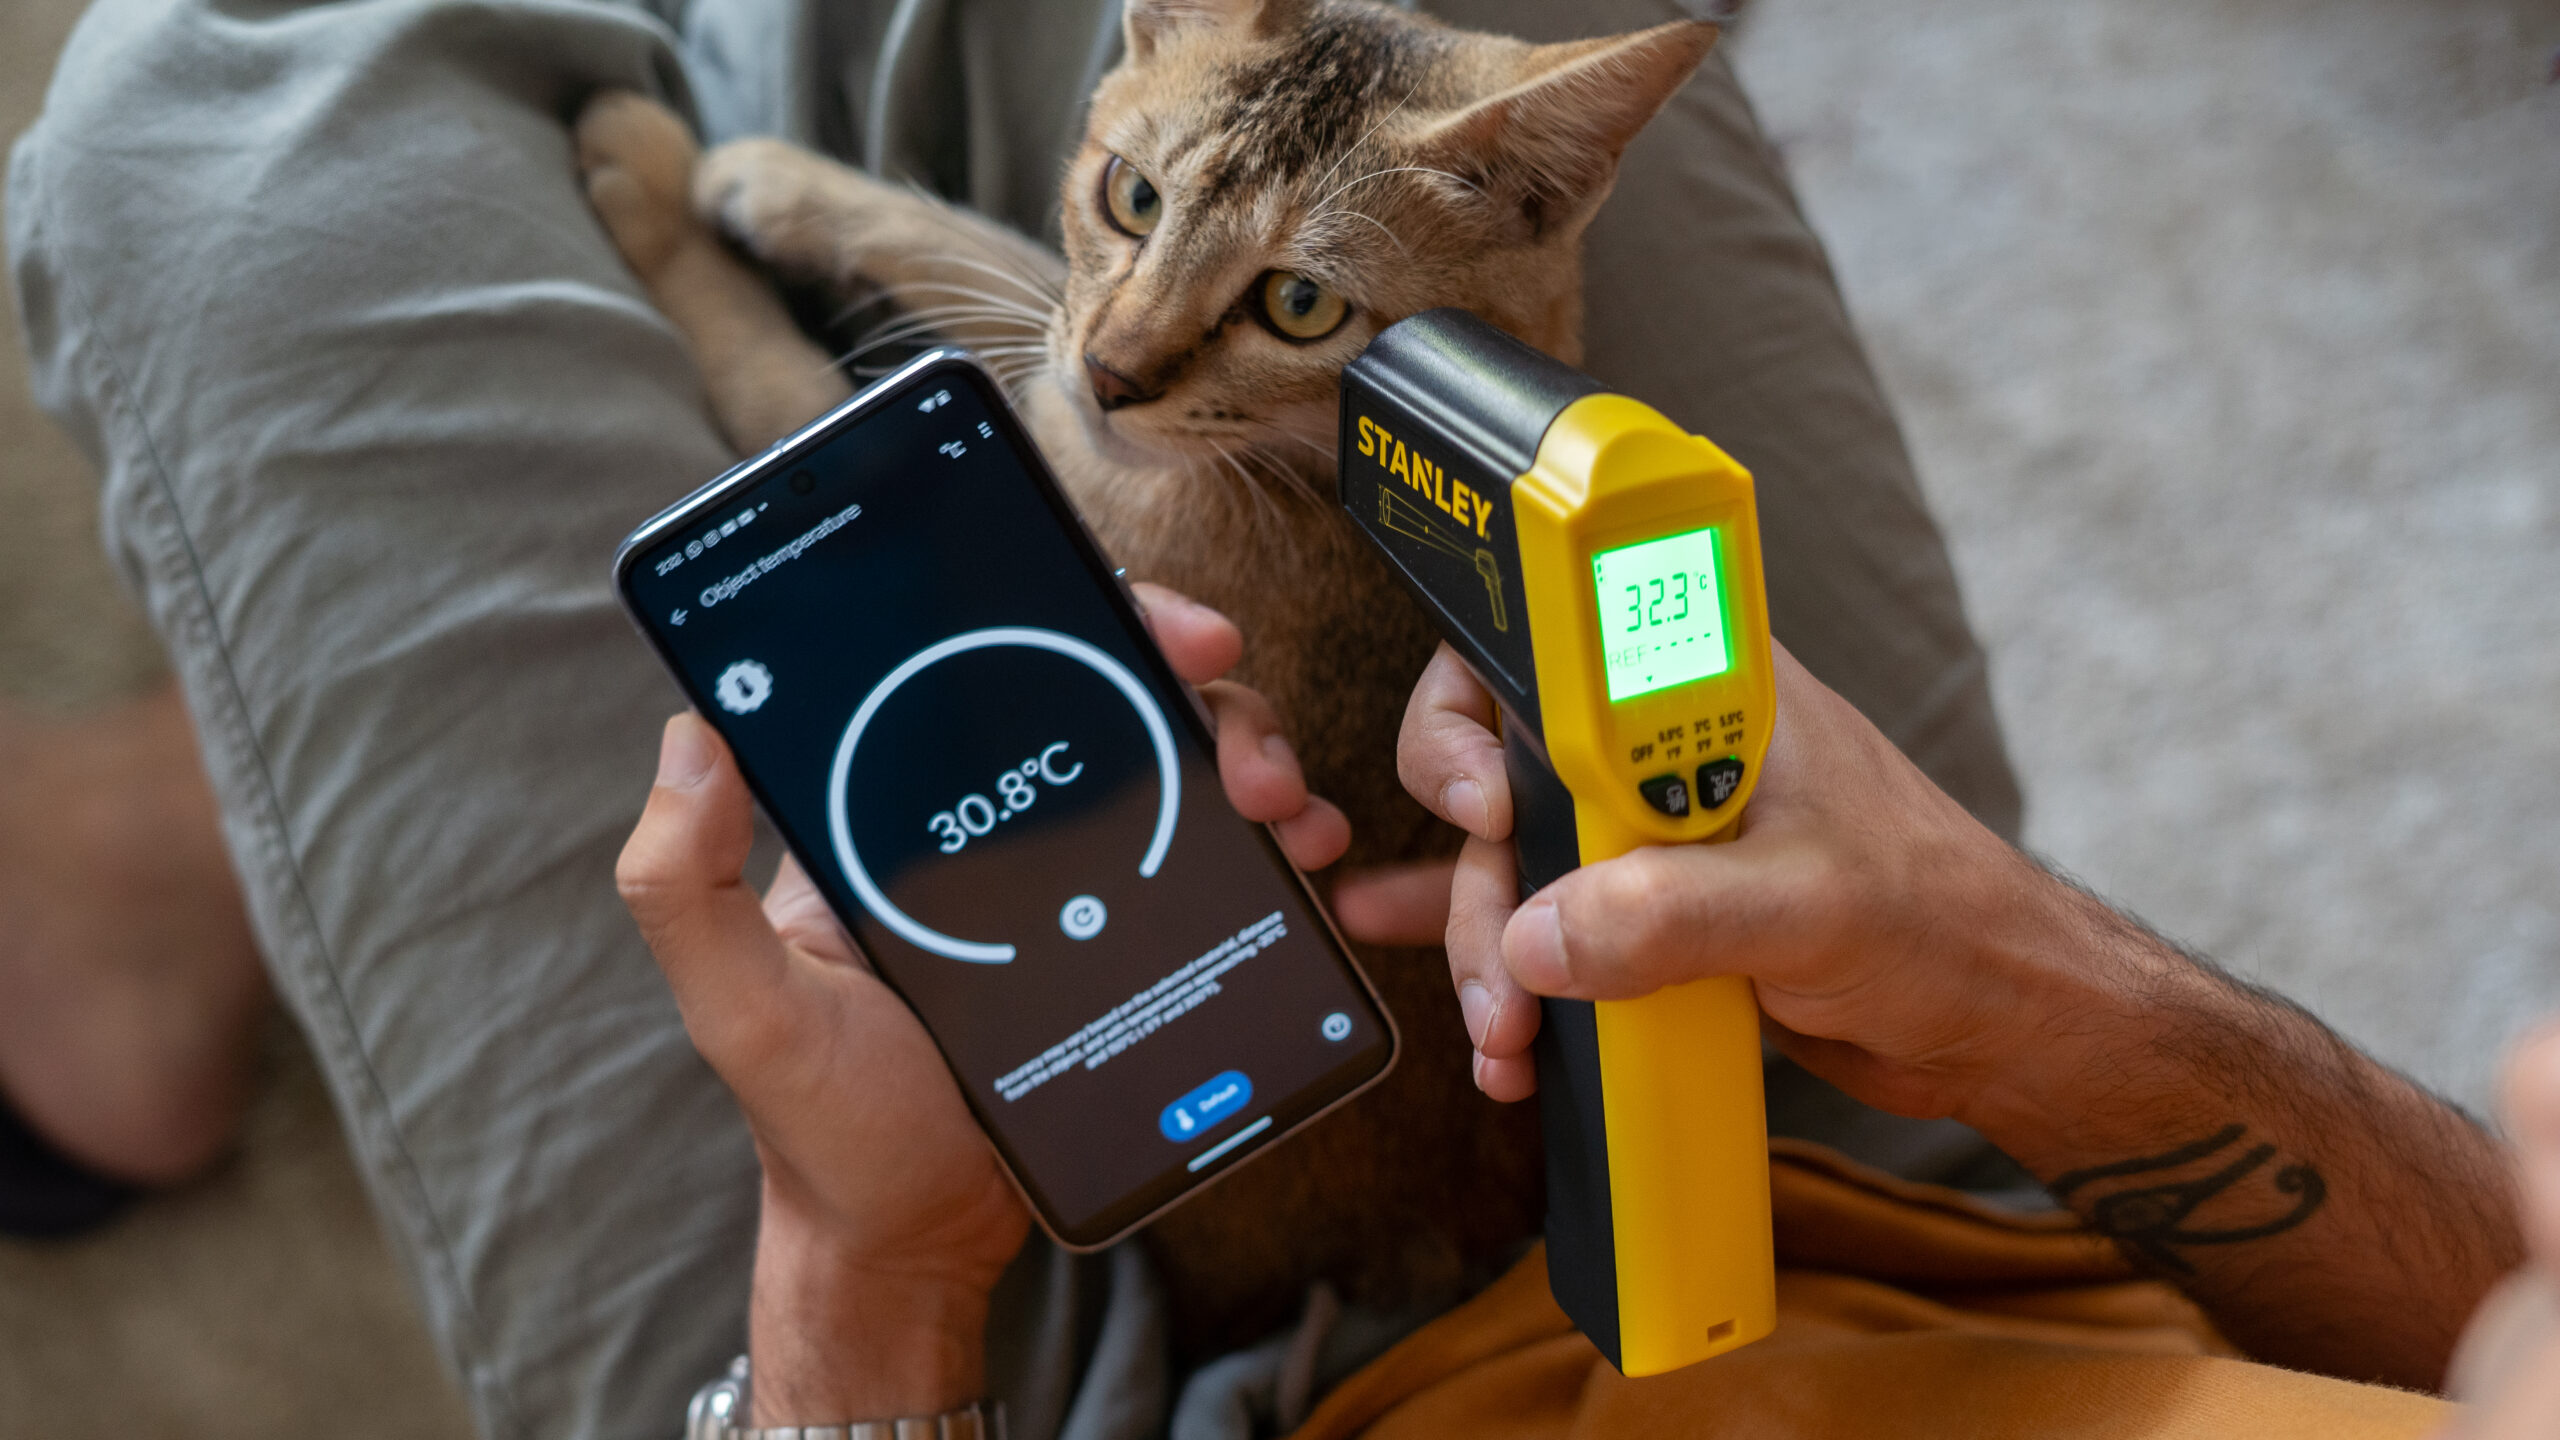 Pixel 8 Pro vs Stanley IR Thermometer measuring a cat's temperature